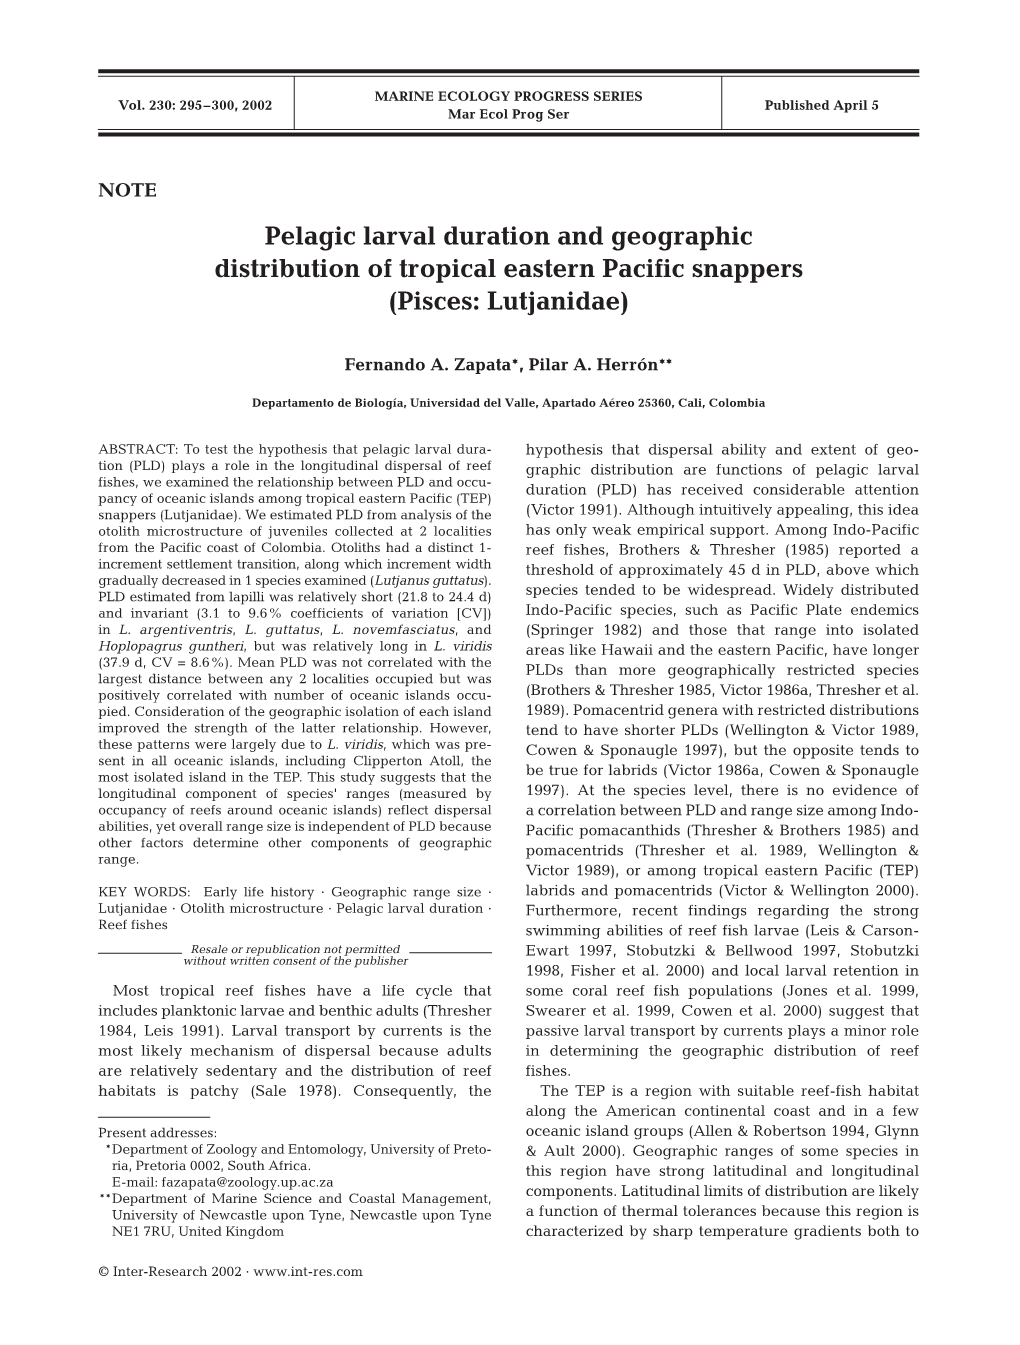 Pelagic Larval Duration and Geographic Distribution of Tropical Eastern Pacific Snappers (Pisces: Lutjanidae)